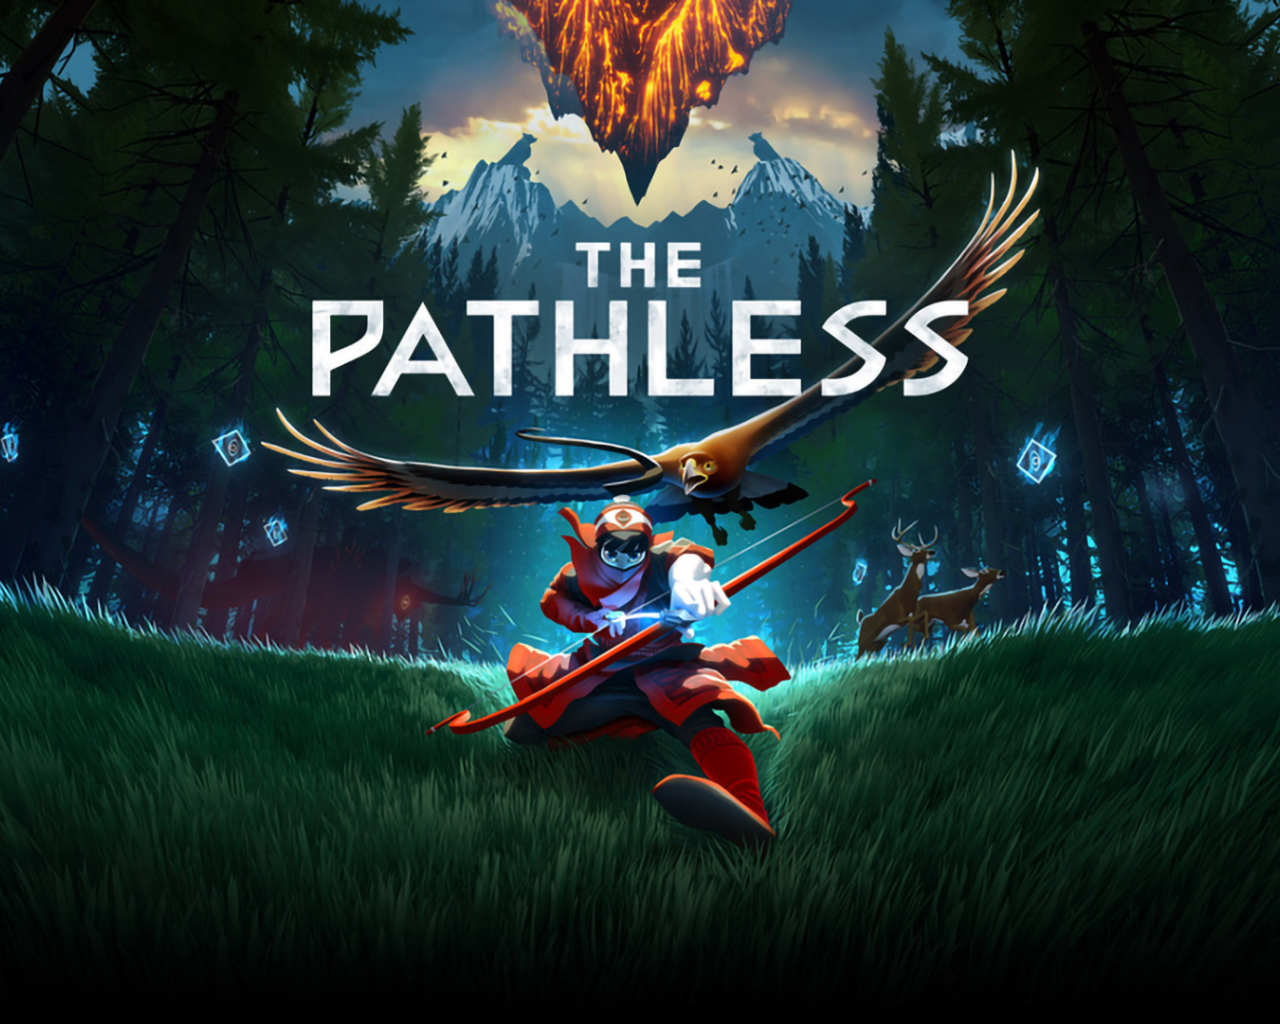 The pathless